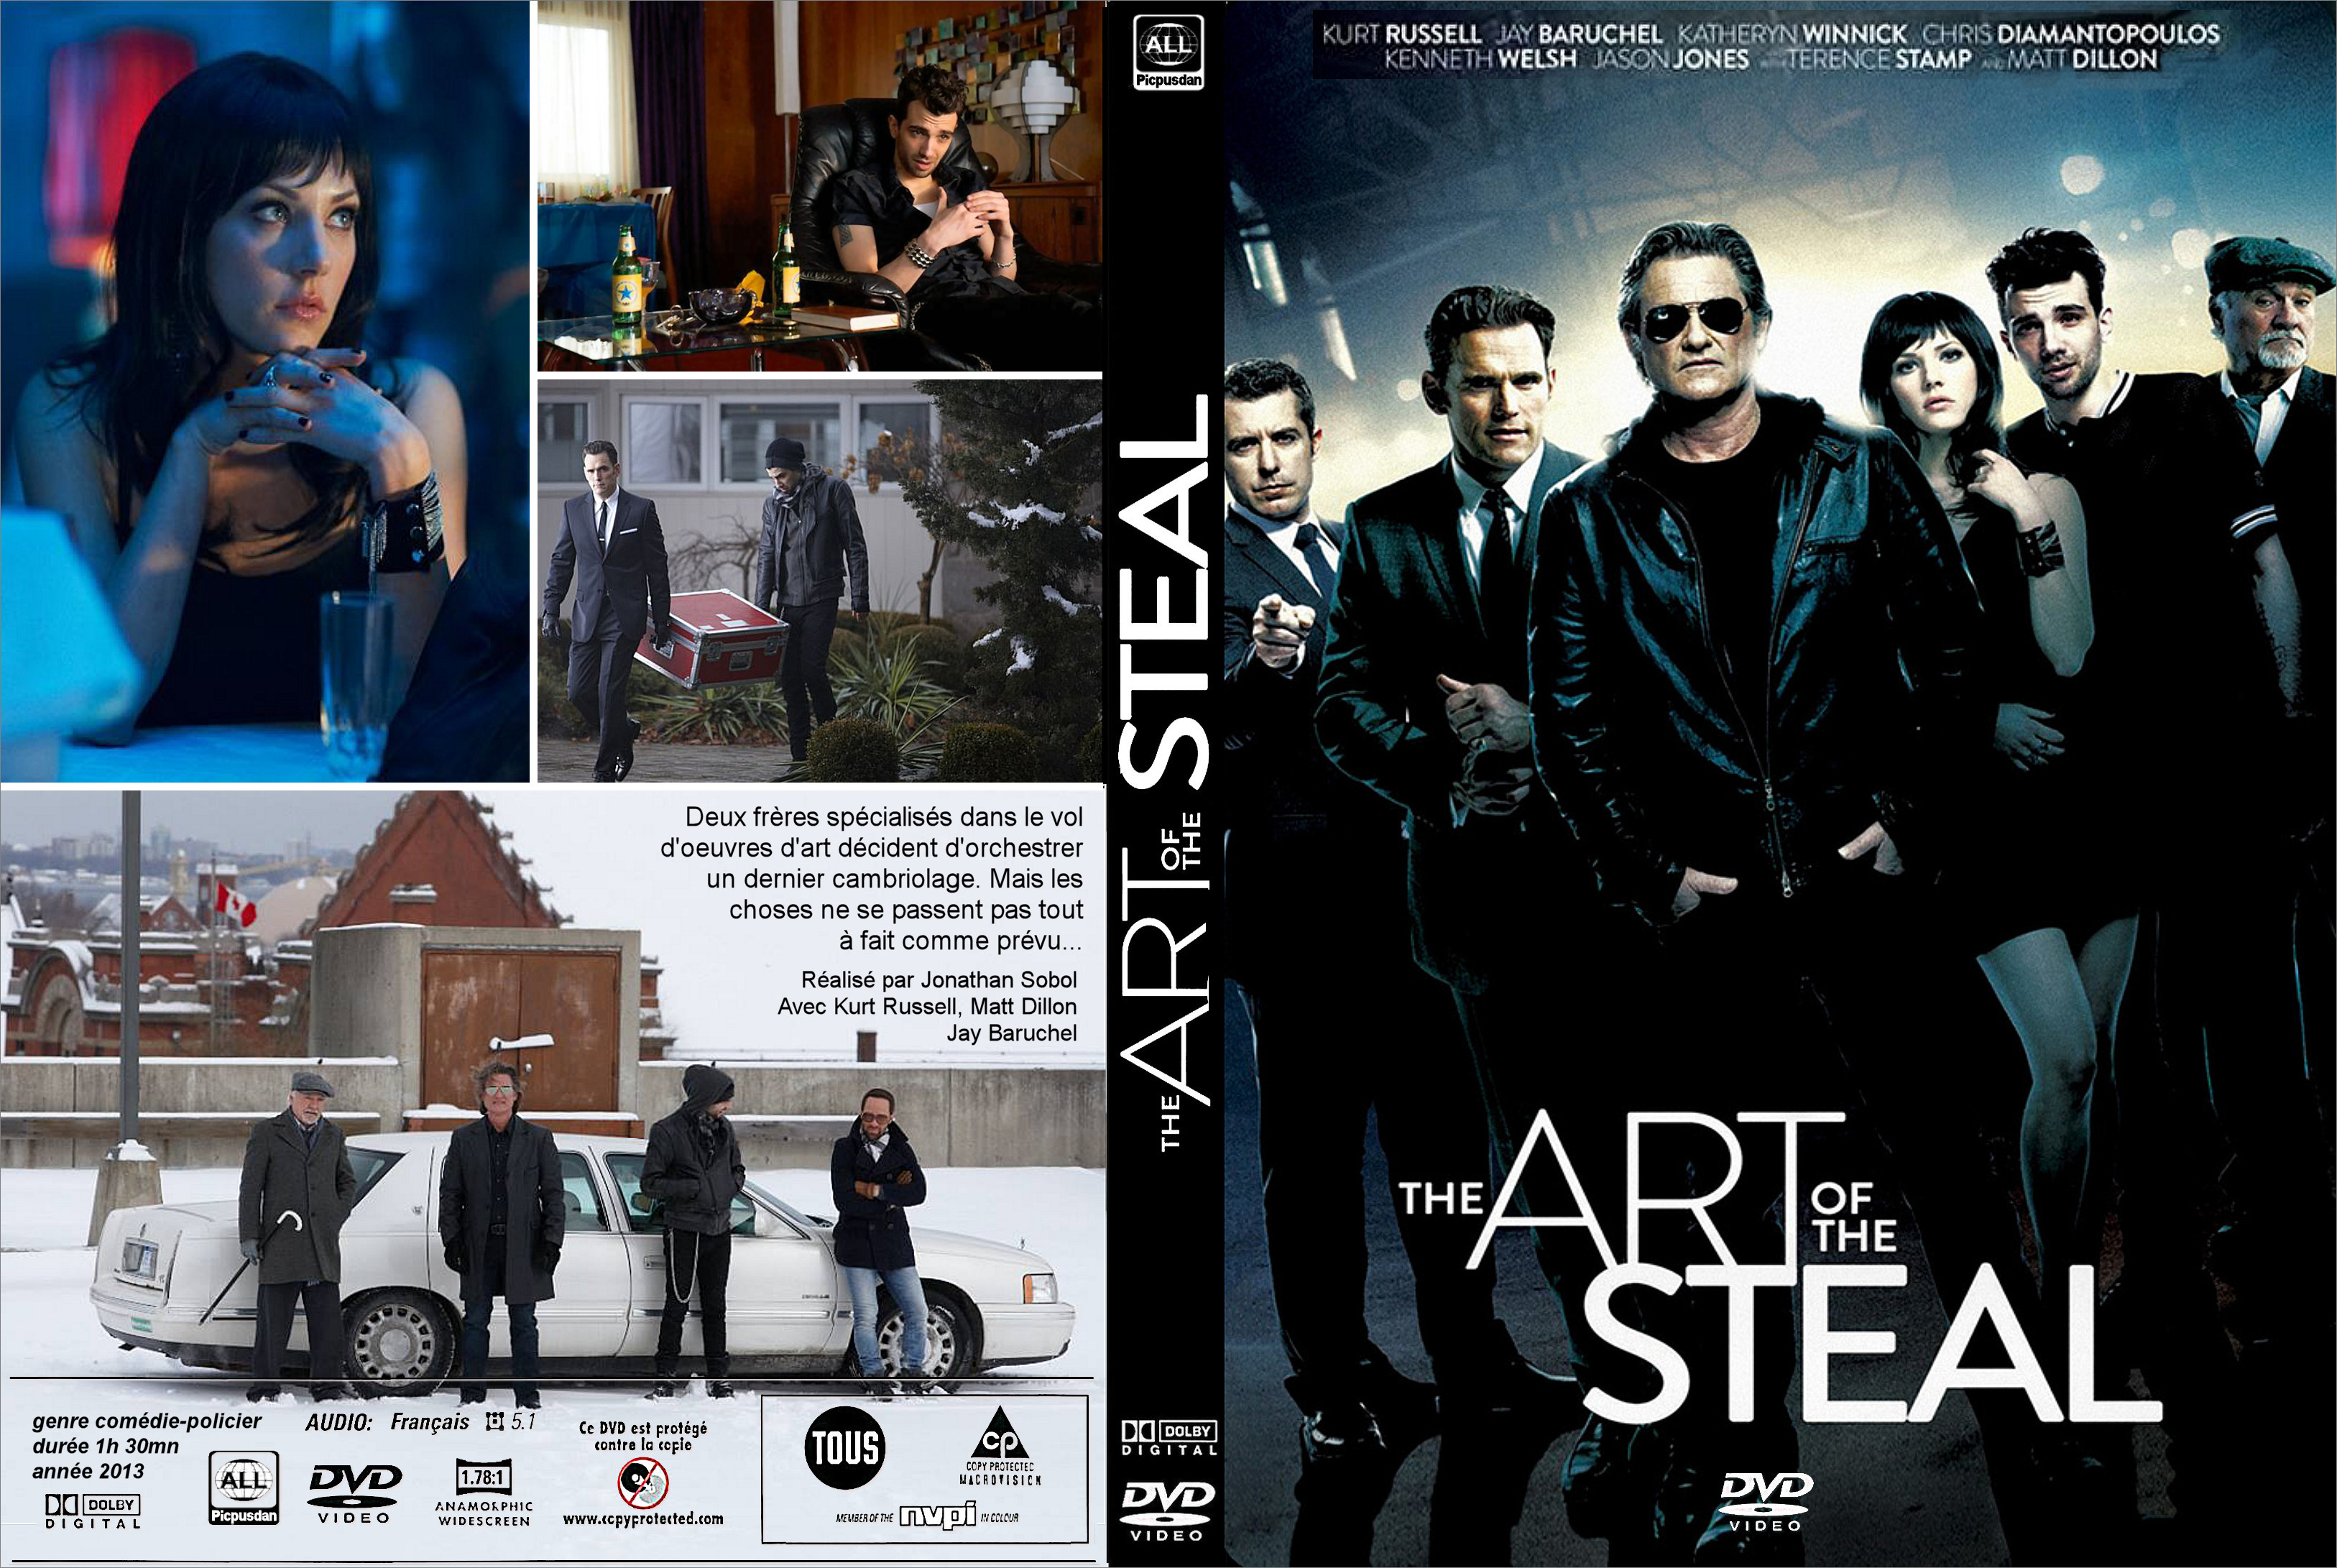 The Art Of The Steal Backgrounds, Compatible - PC, Mobile, Gadgets| 3252x2182 px